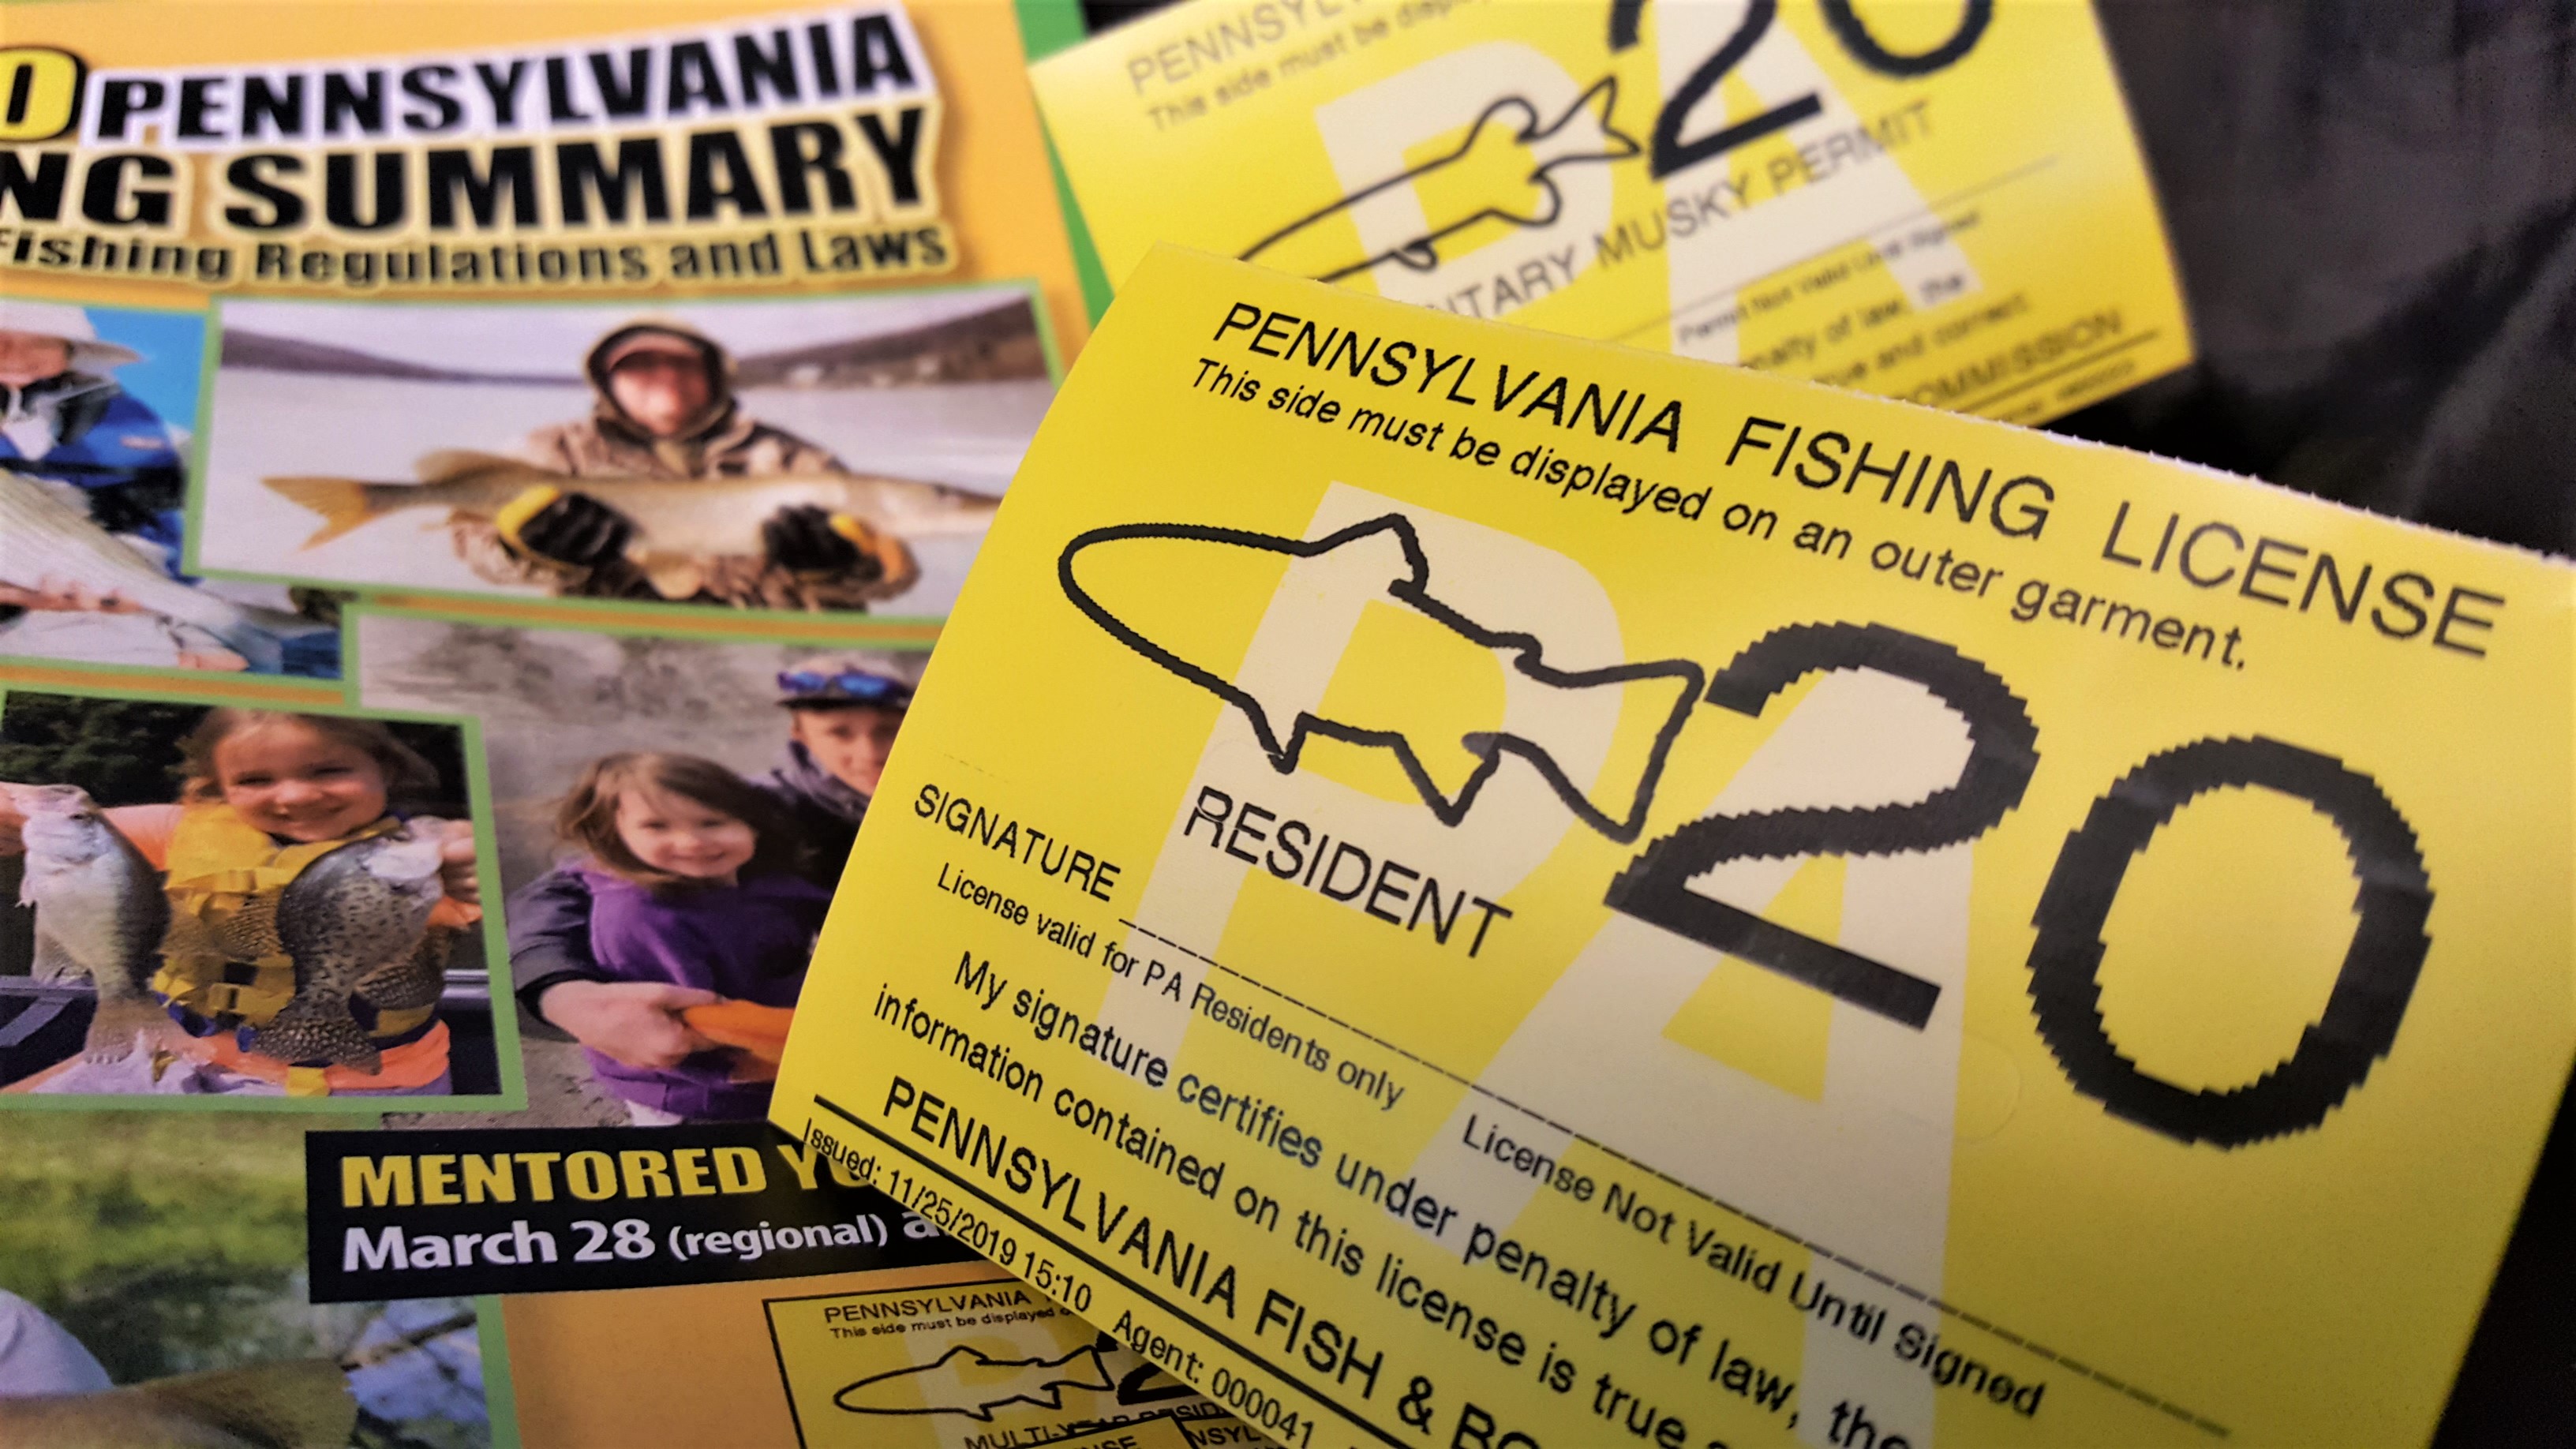 2020 PENNSYLVANIA FISHING LICENSES, PERMITS AND GIFT VOUCHERS TO